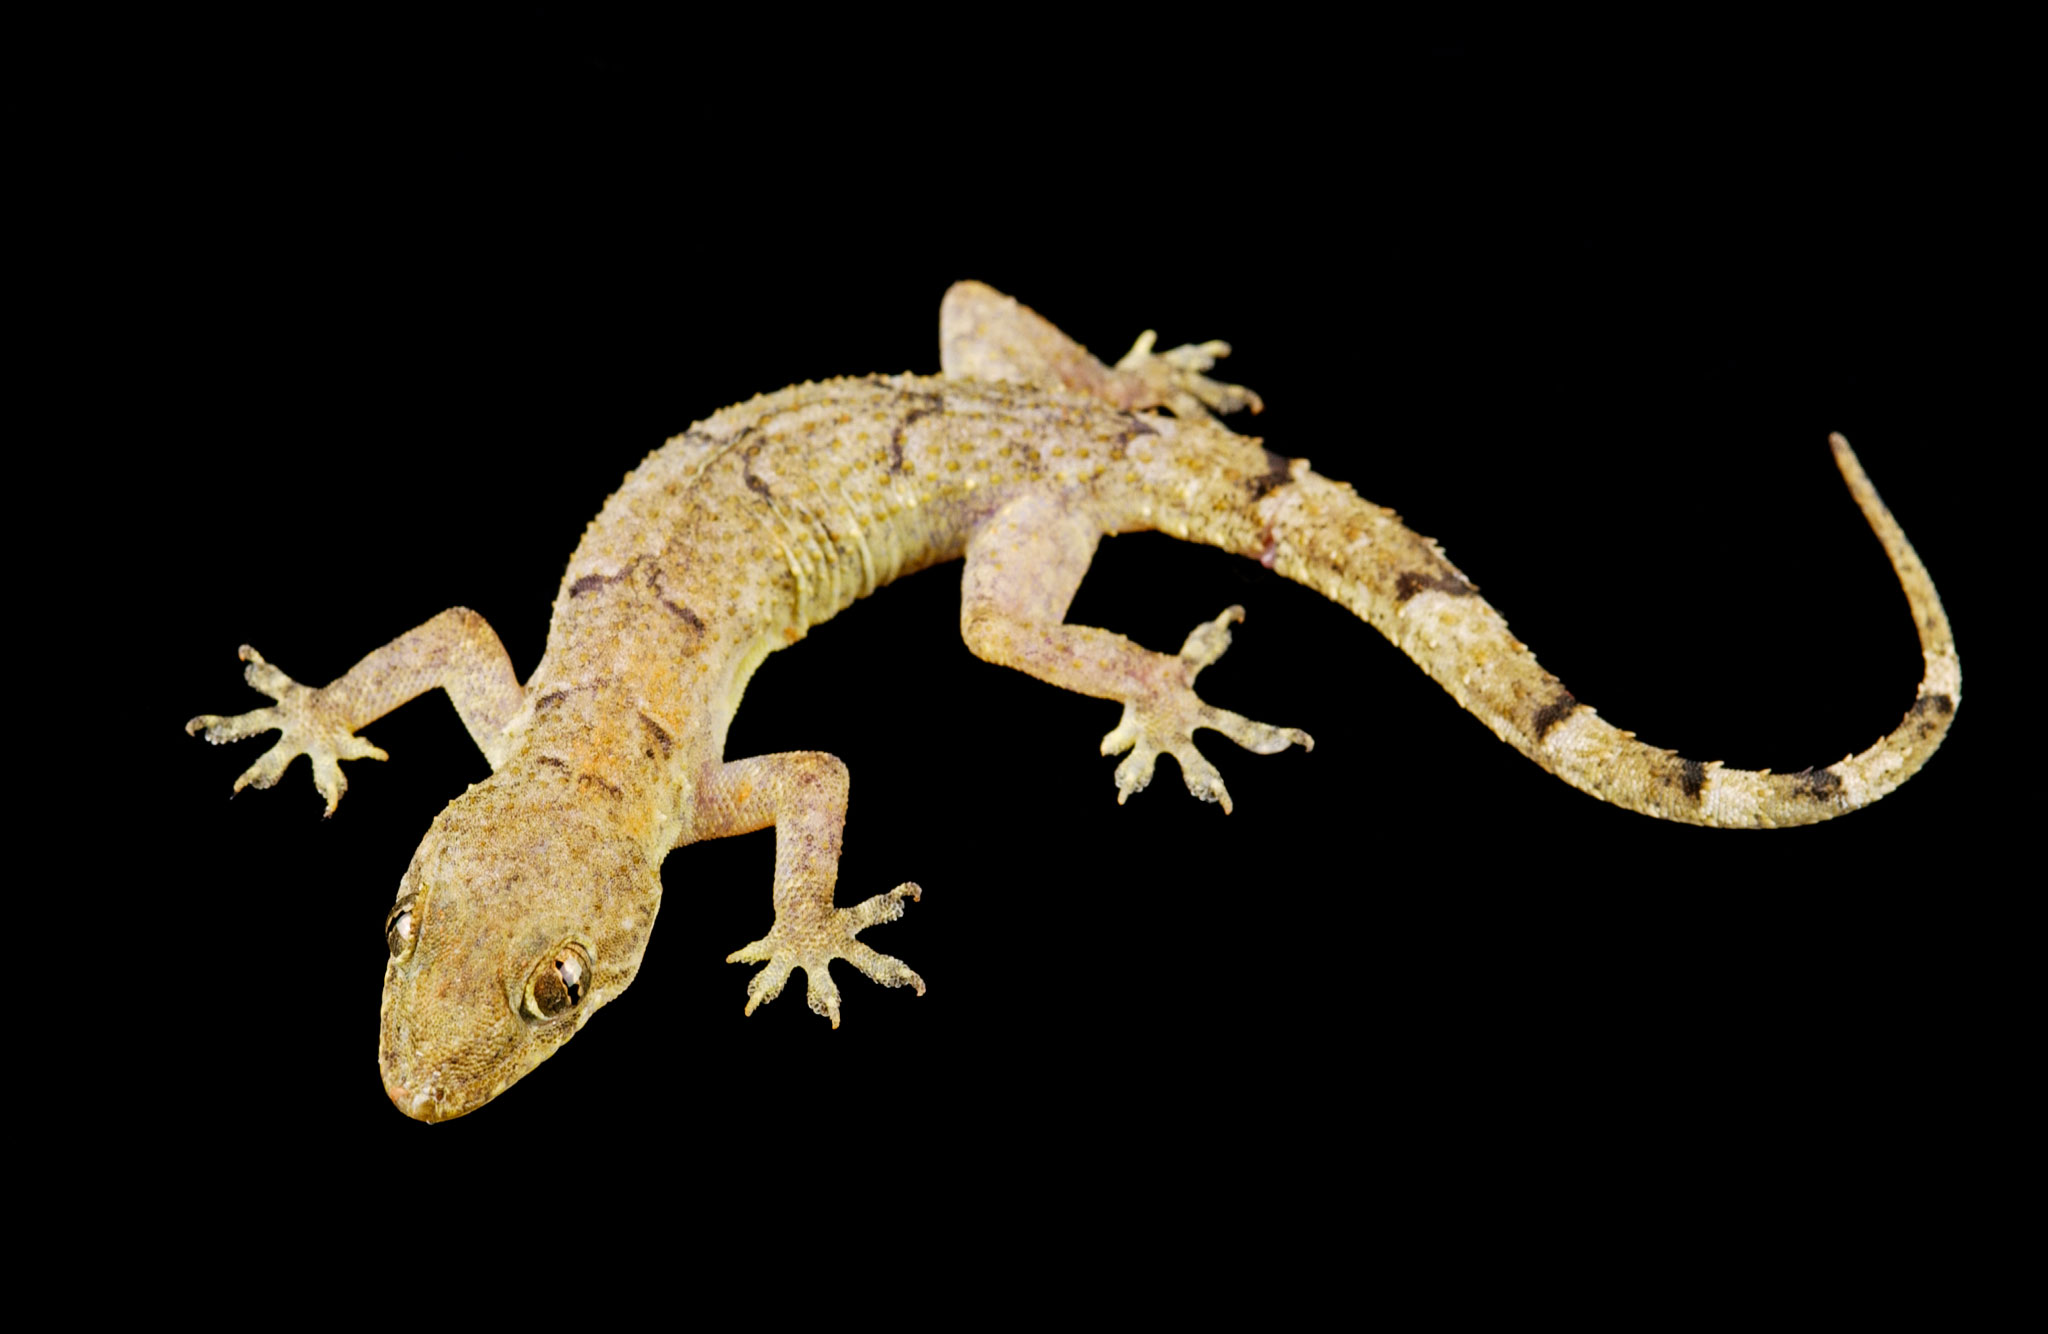 Geckos May Be Famously Sticky, but Here's What Stumps Them